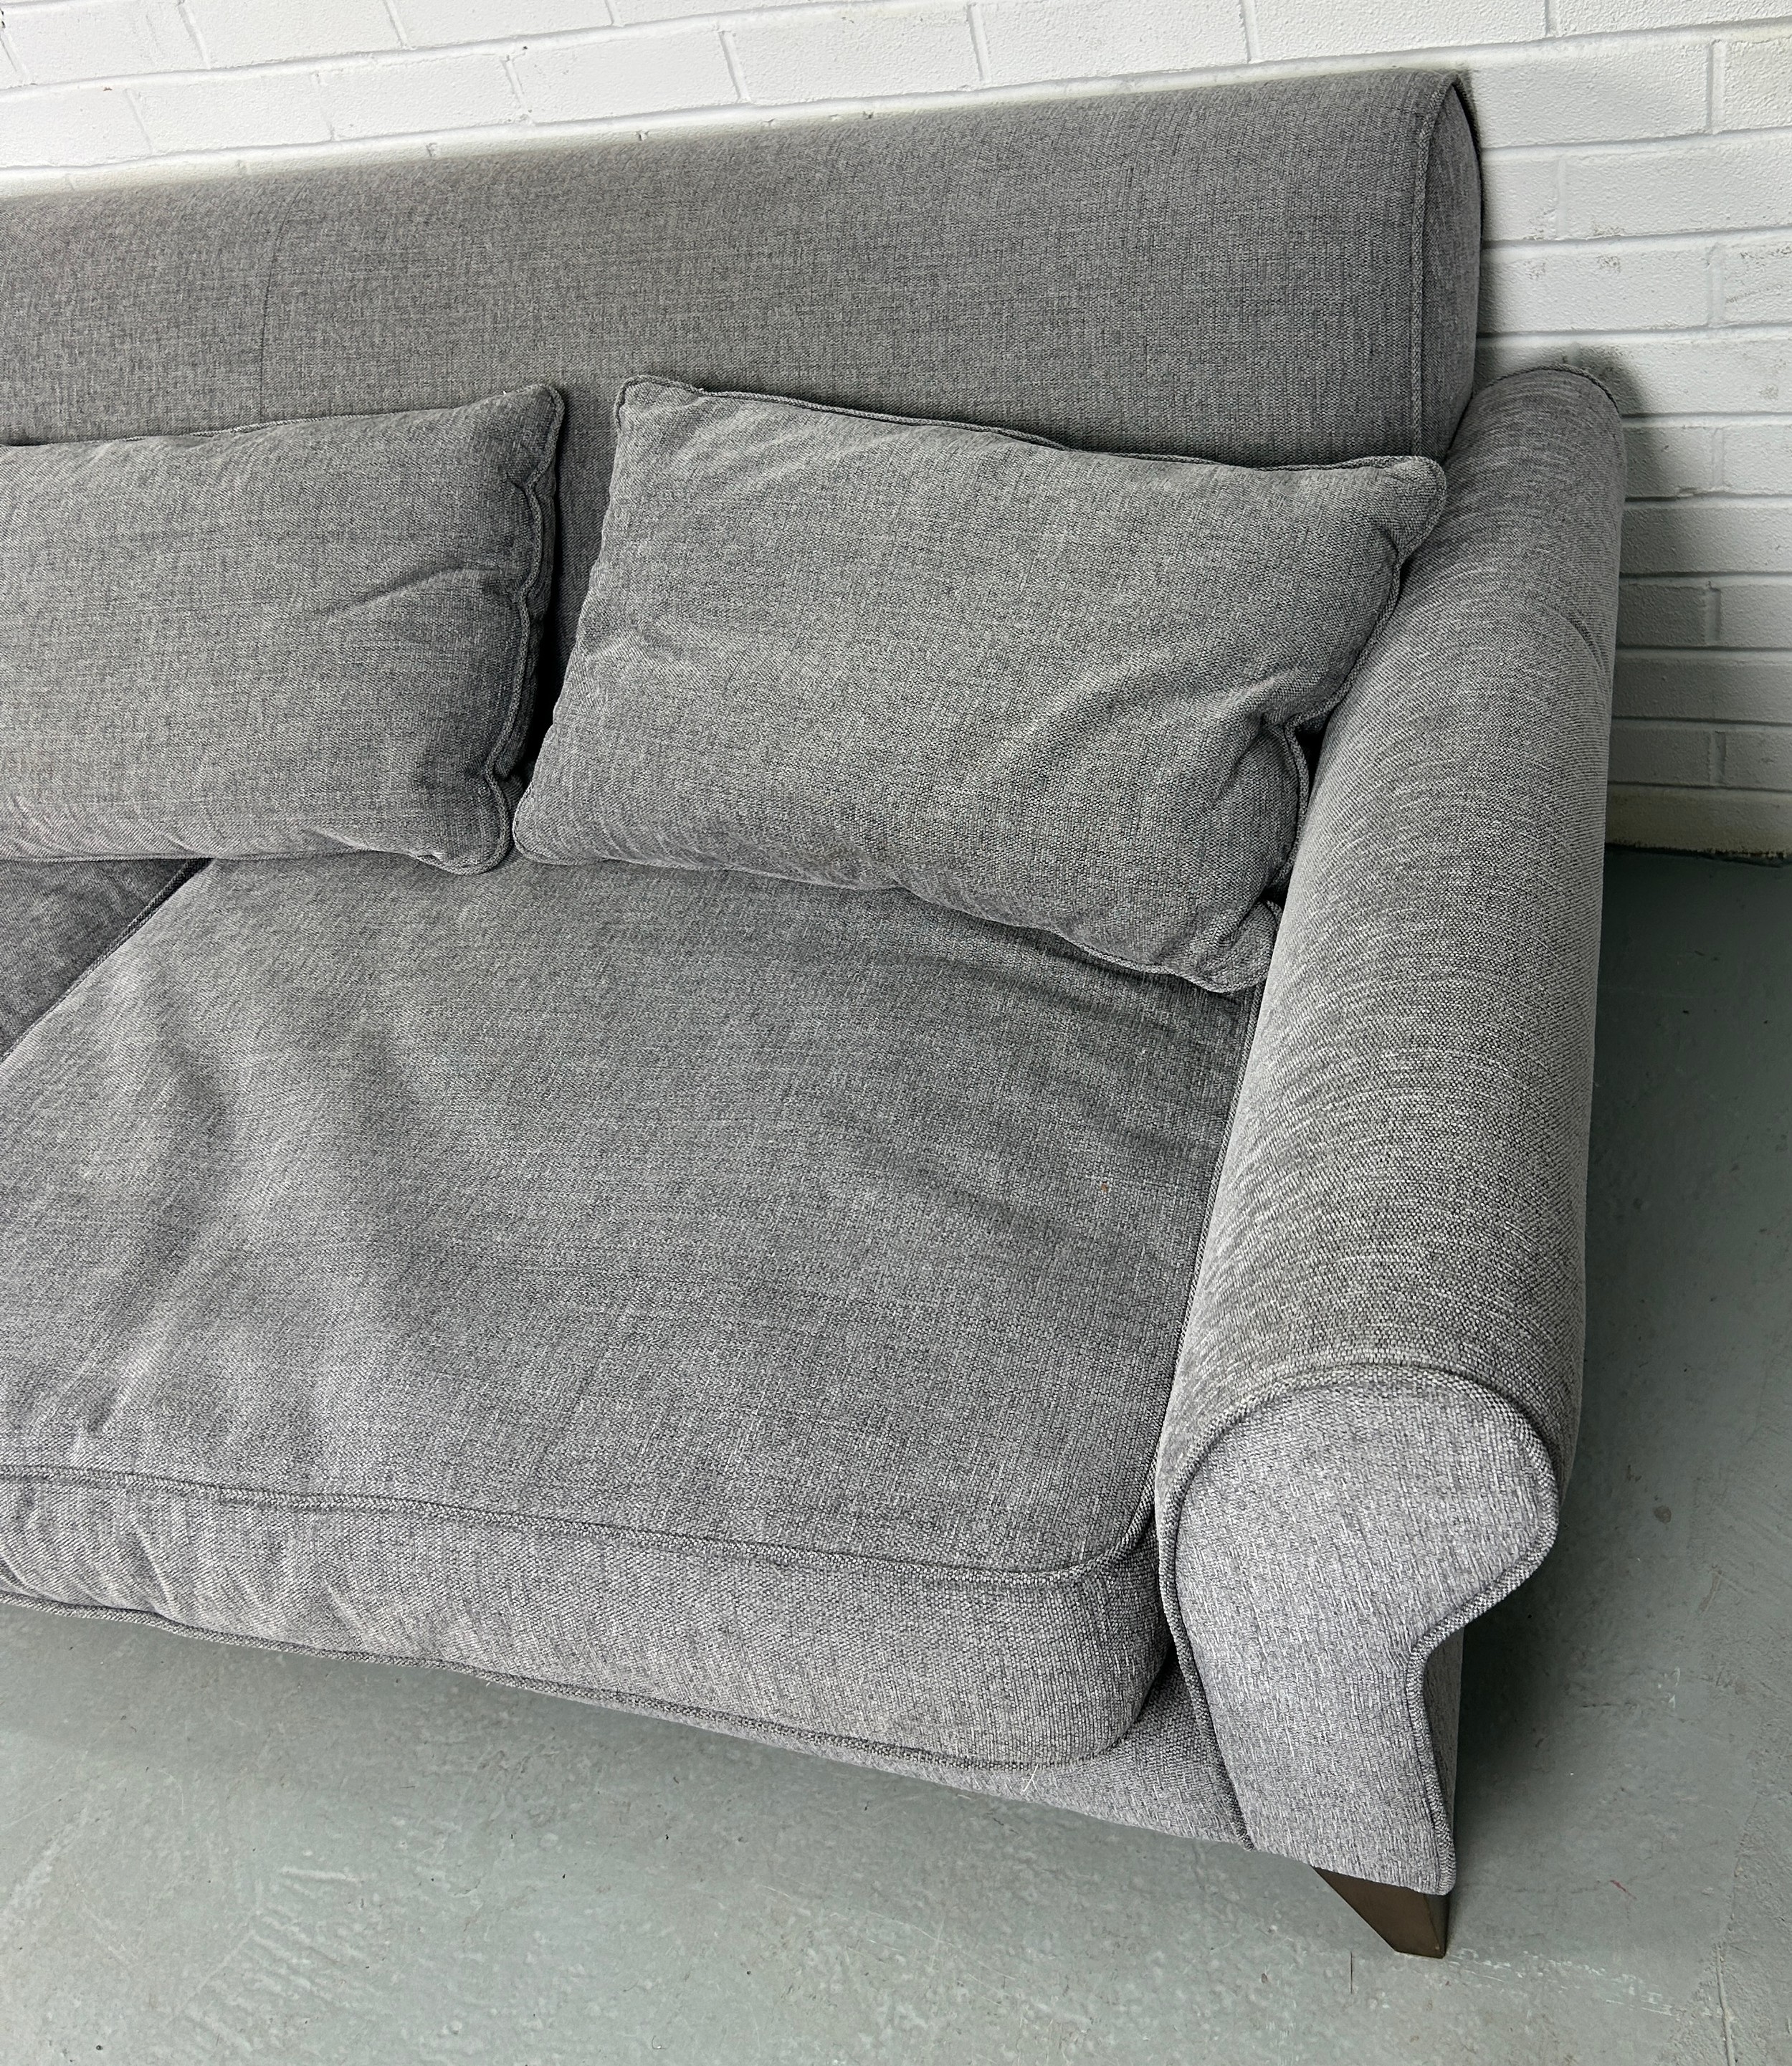 A 'CONTENT' BY CONRAN GREY UPHOLSTERED TWO SEATER SOFA, 246cm x 117cm x 77cm - Image 2 of 8